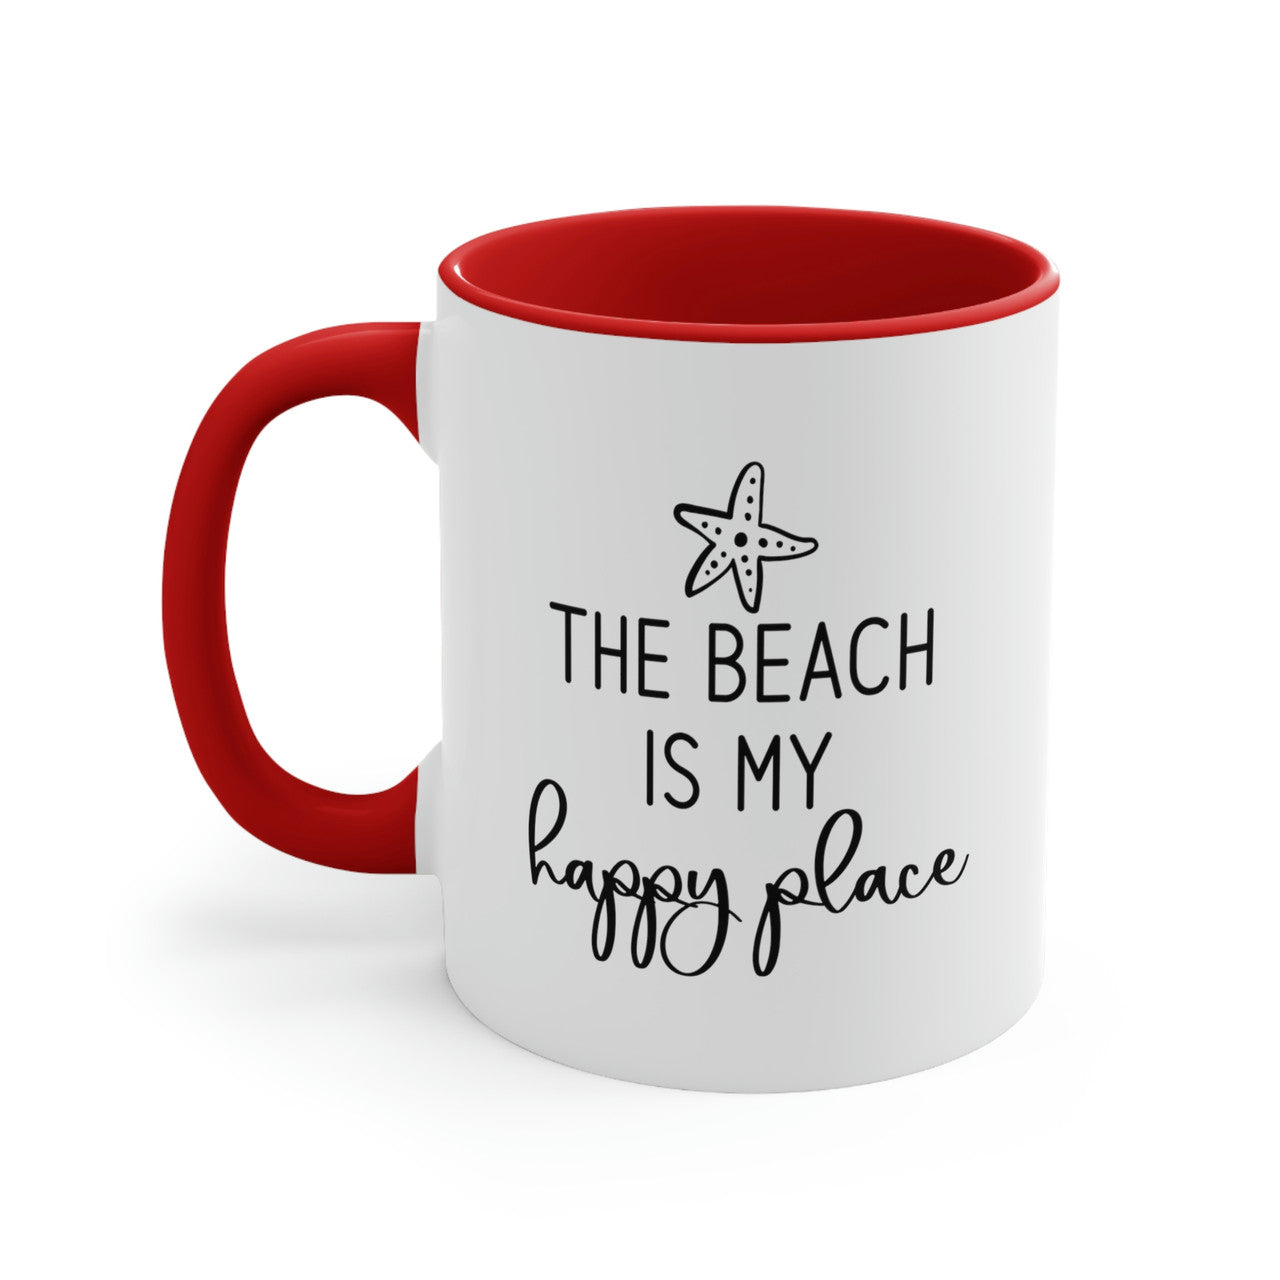 The Beach Is My Happy Place Ceramic Coffee Mug, 5 Colors Mugs New England Trading Co Red  